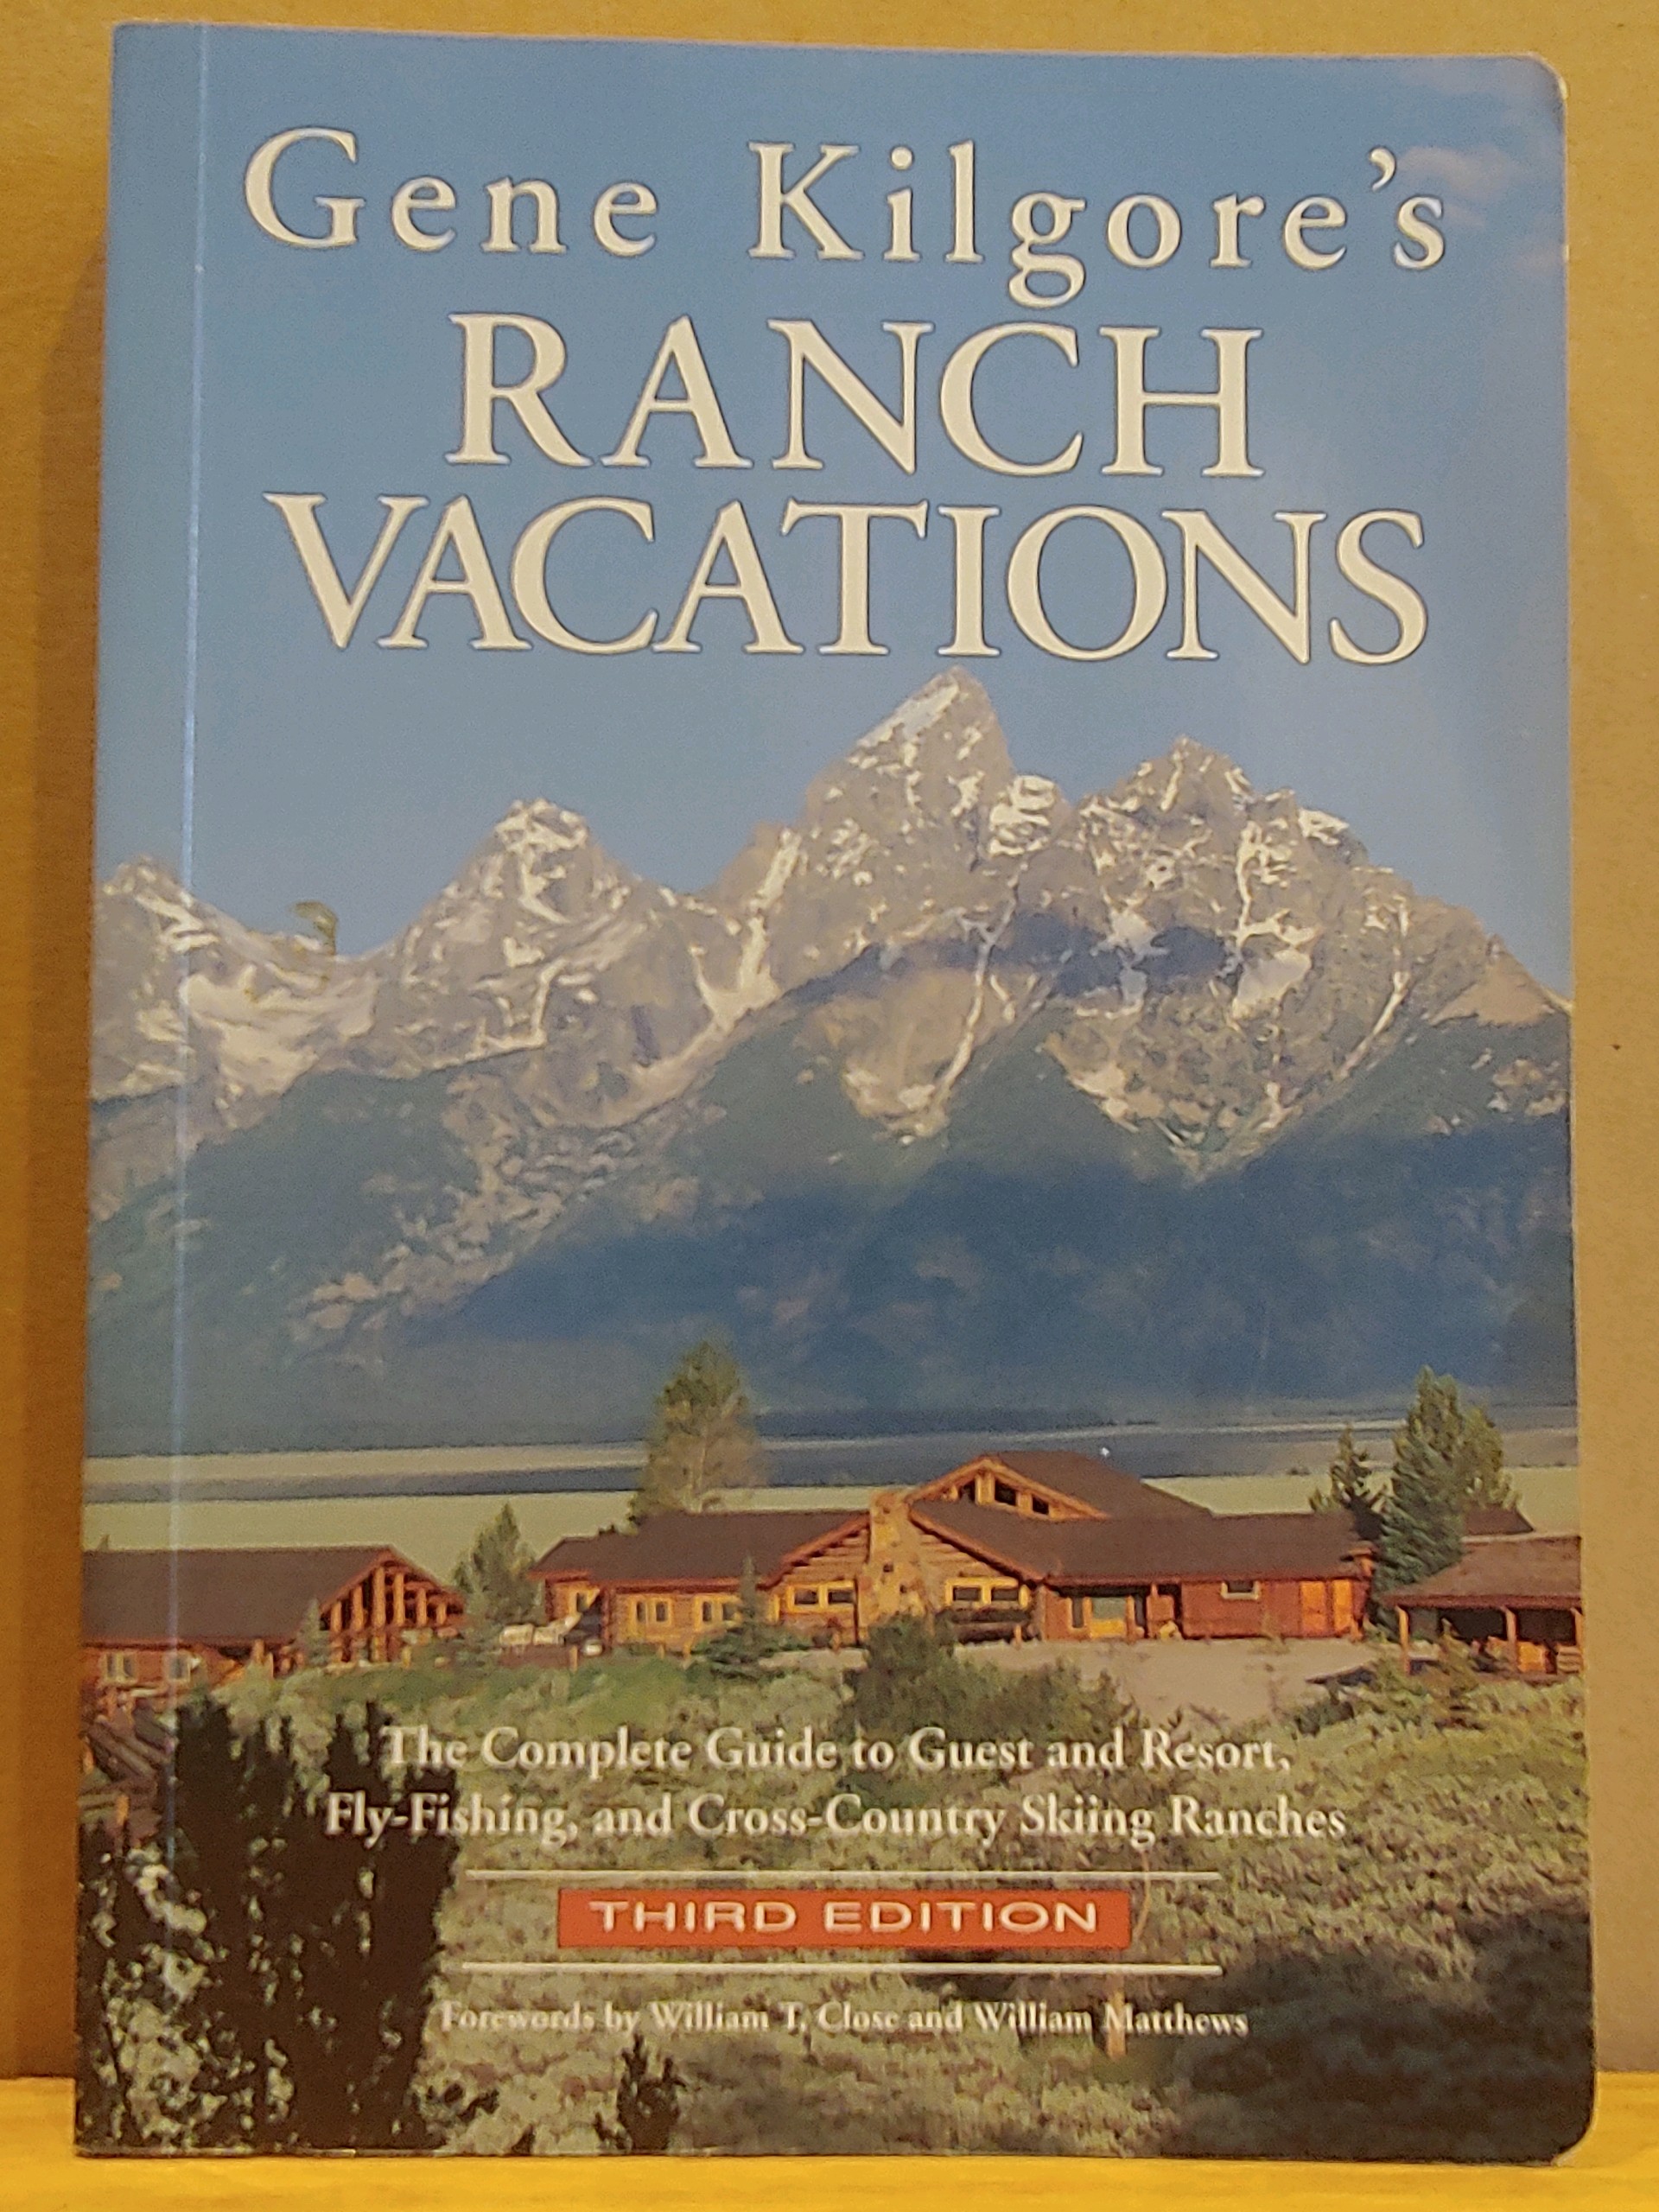 Gene Kilgore's Ranch Vacations: The Complete Guide to Guest and Resort, Fly-Fishing, and Cross-Country Skiing Ranches - Kilgore, Gene